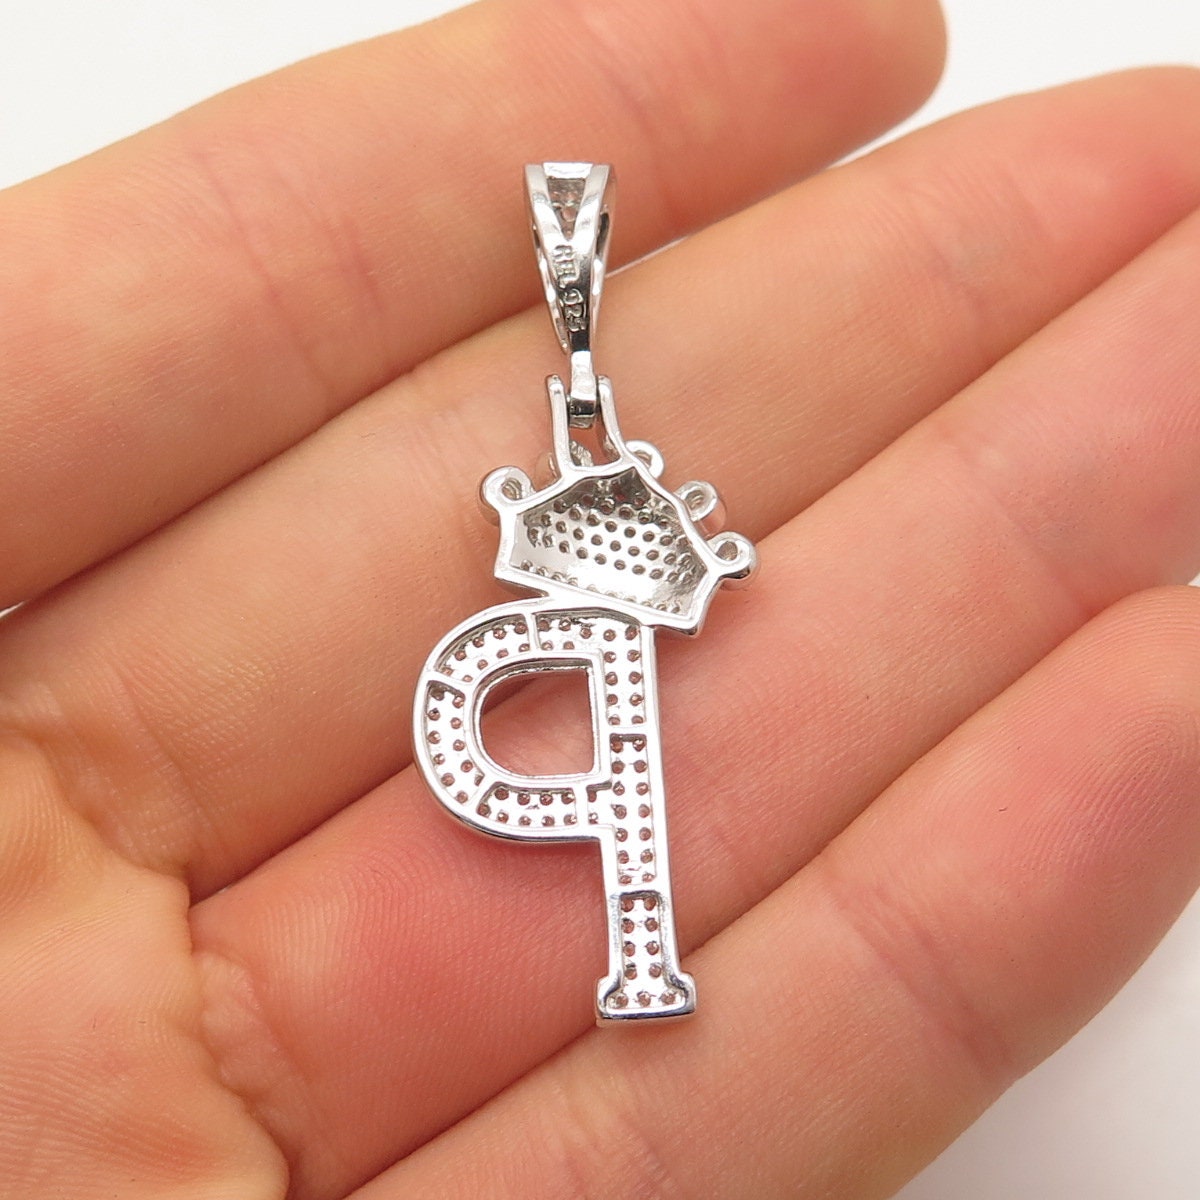 Stainless Steel Pave Set Cz Letter Charms Pdc9020